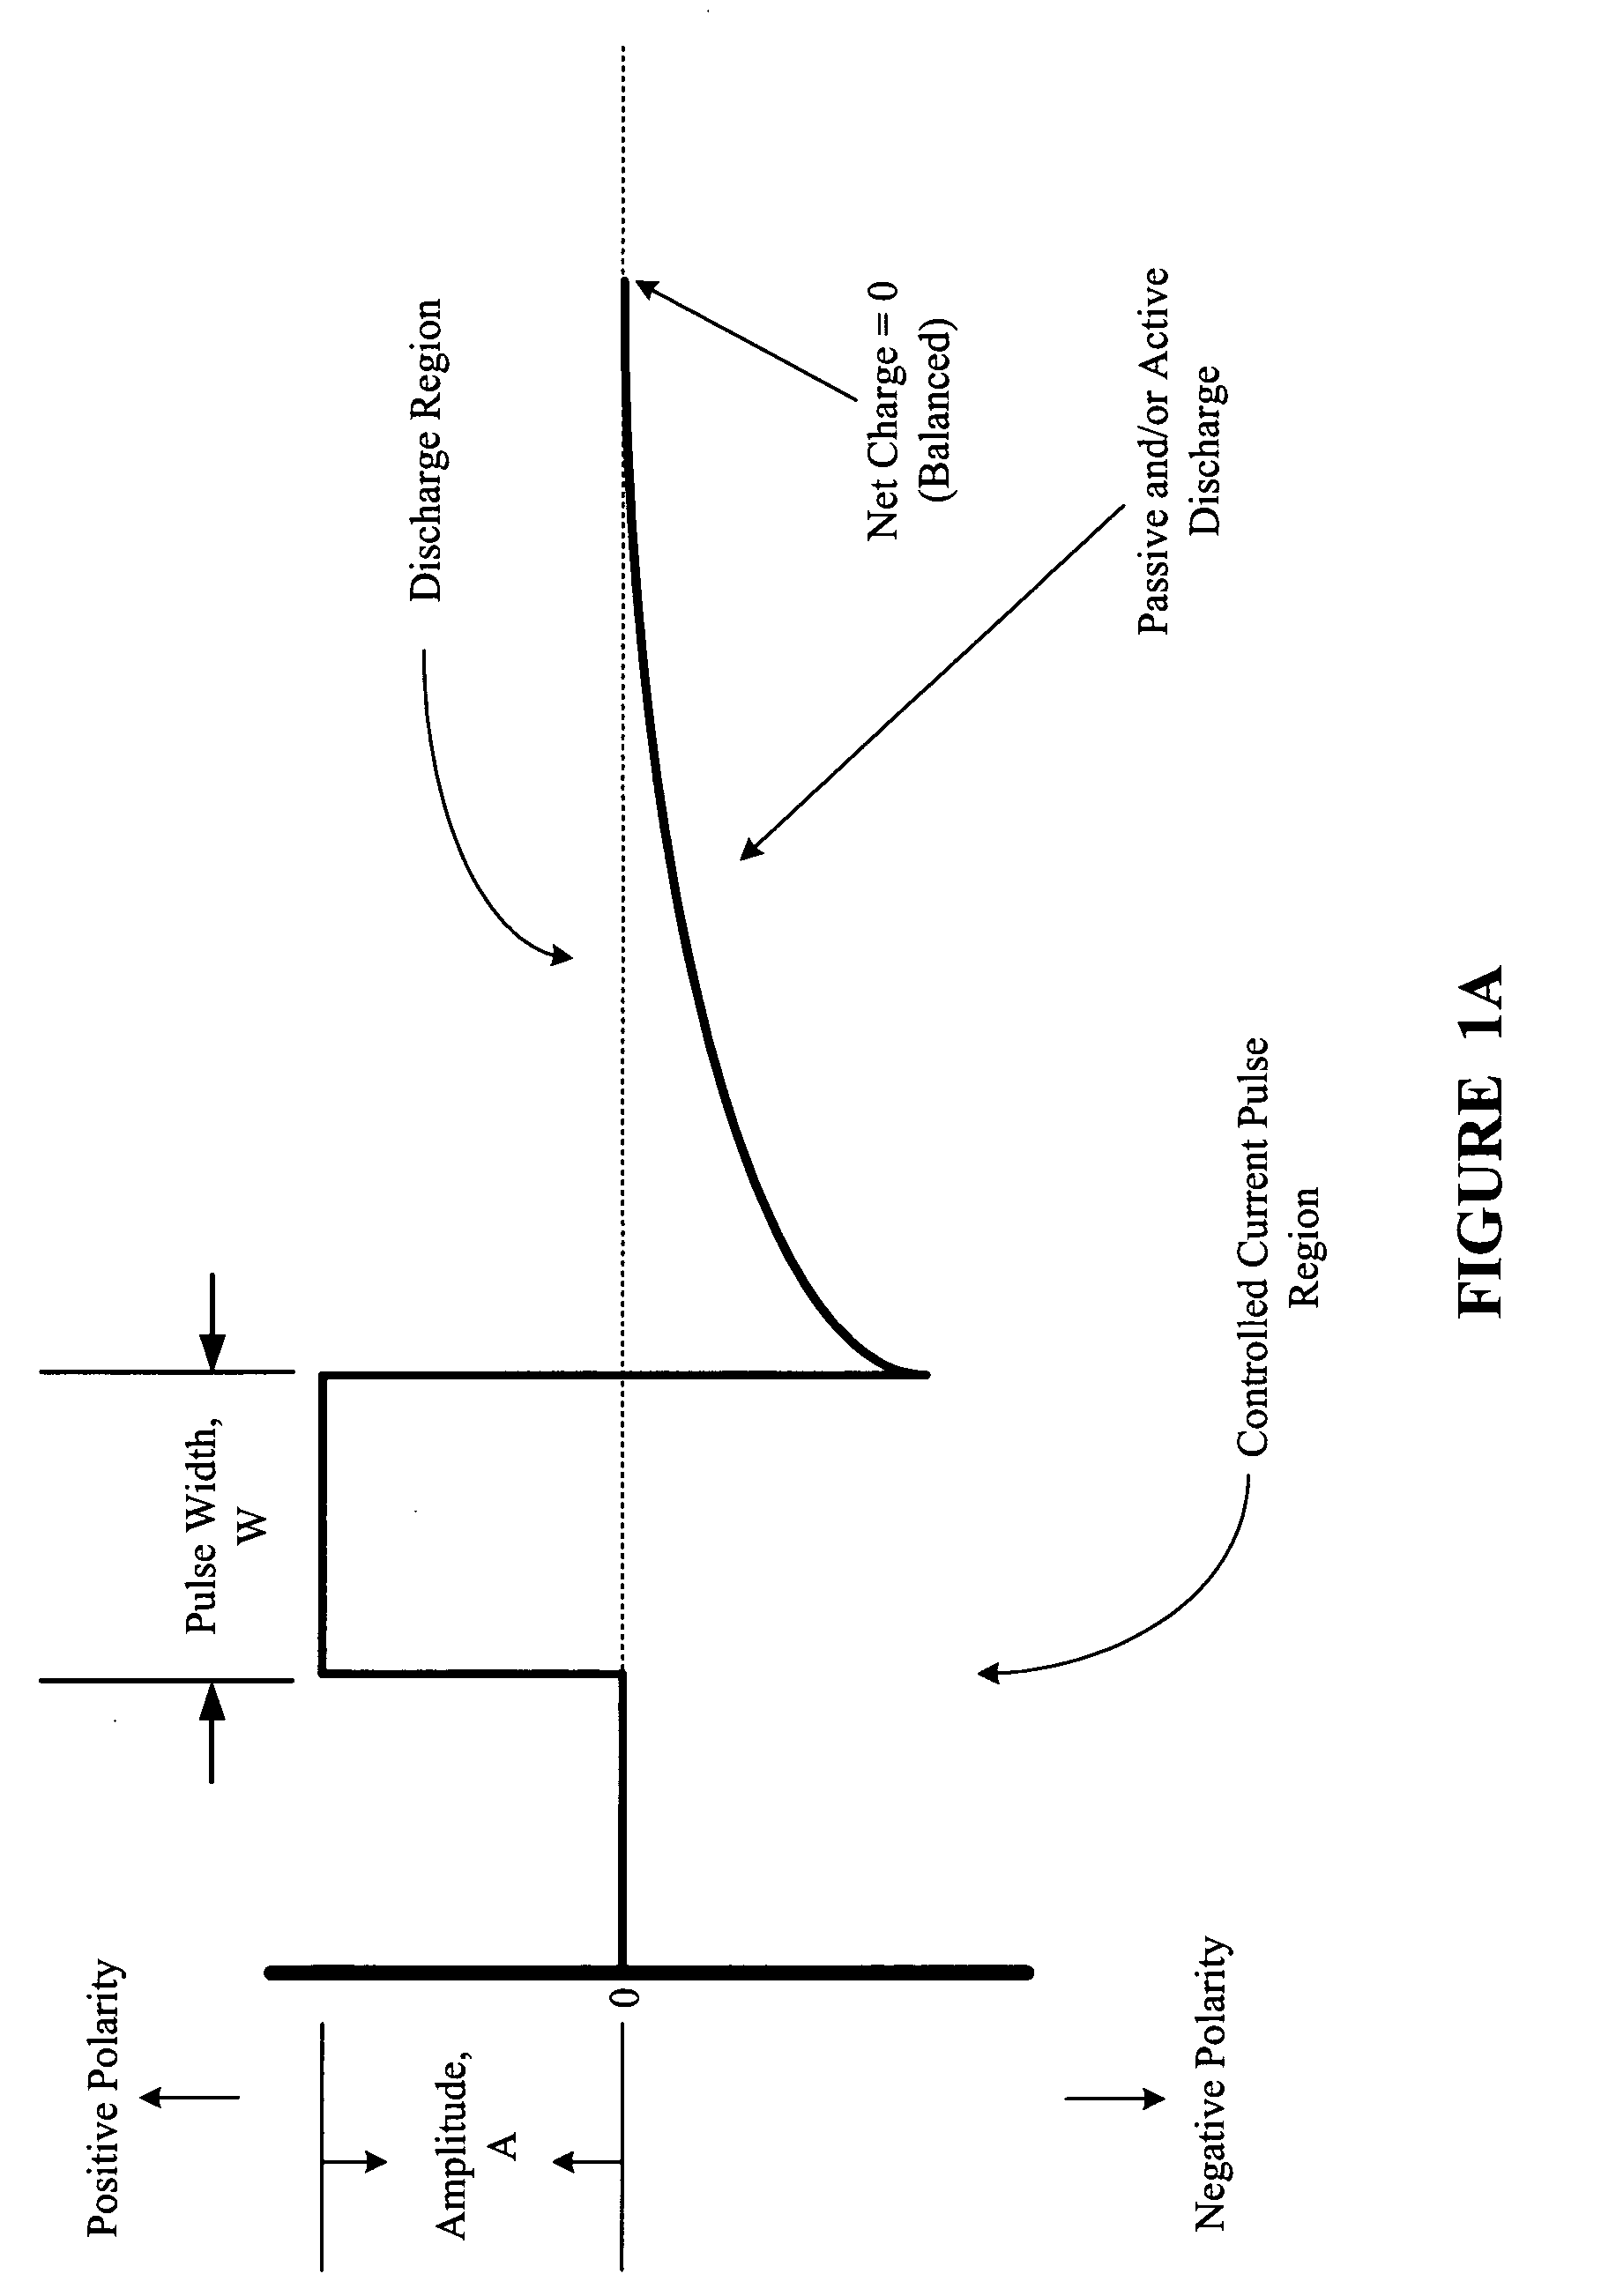 Multi-phasic signal for stimulation by an implantable device